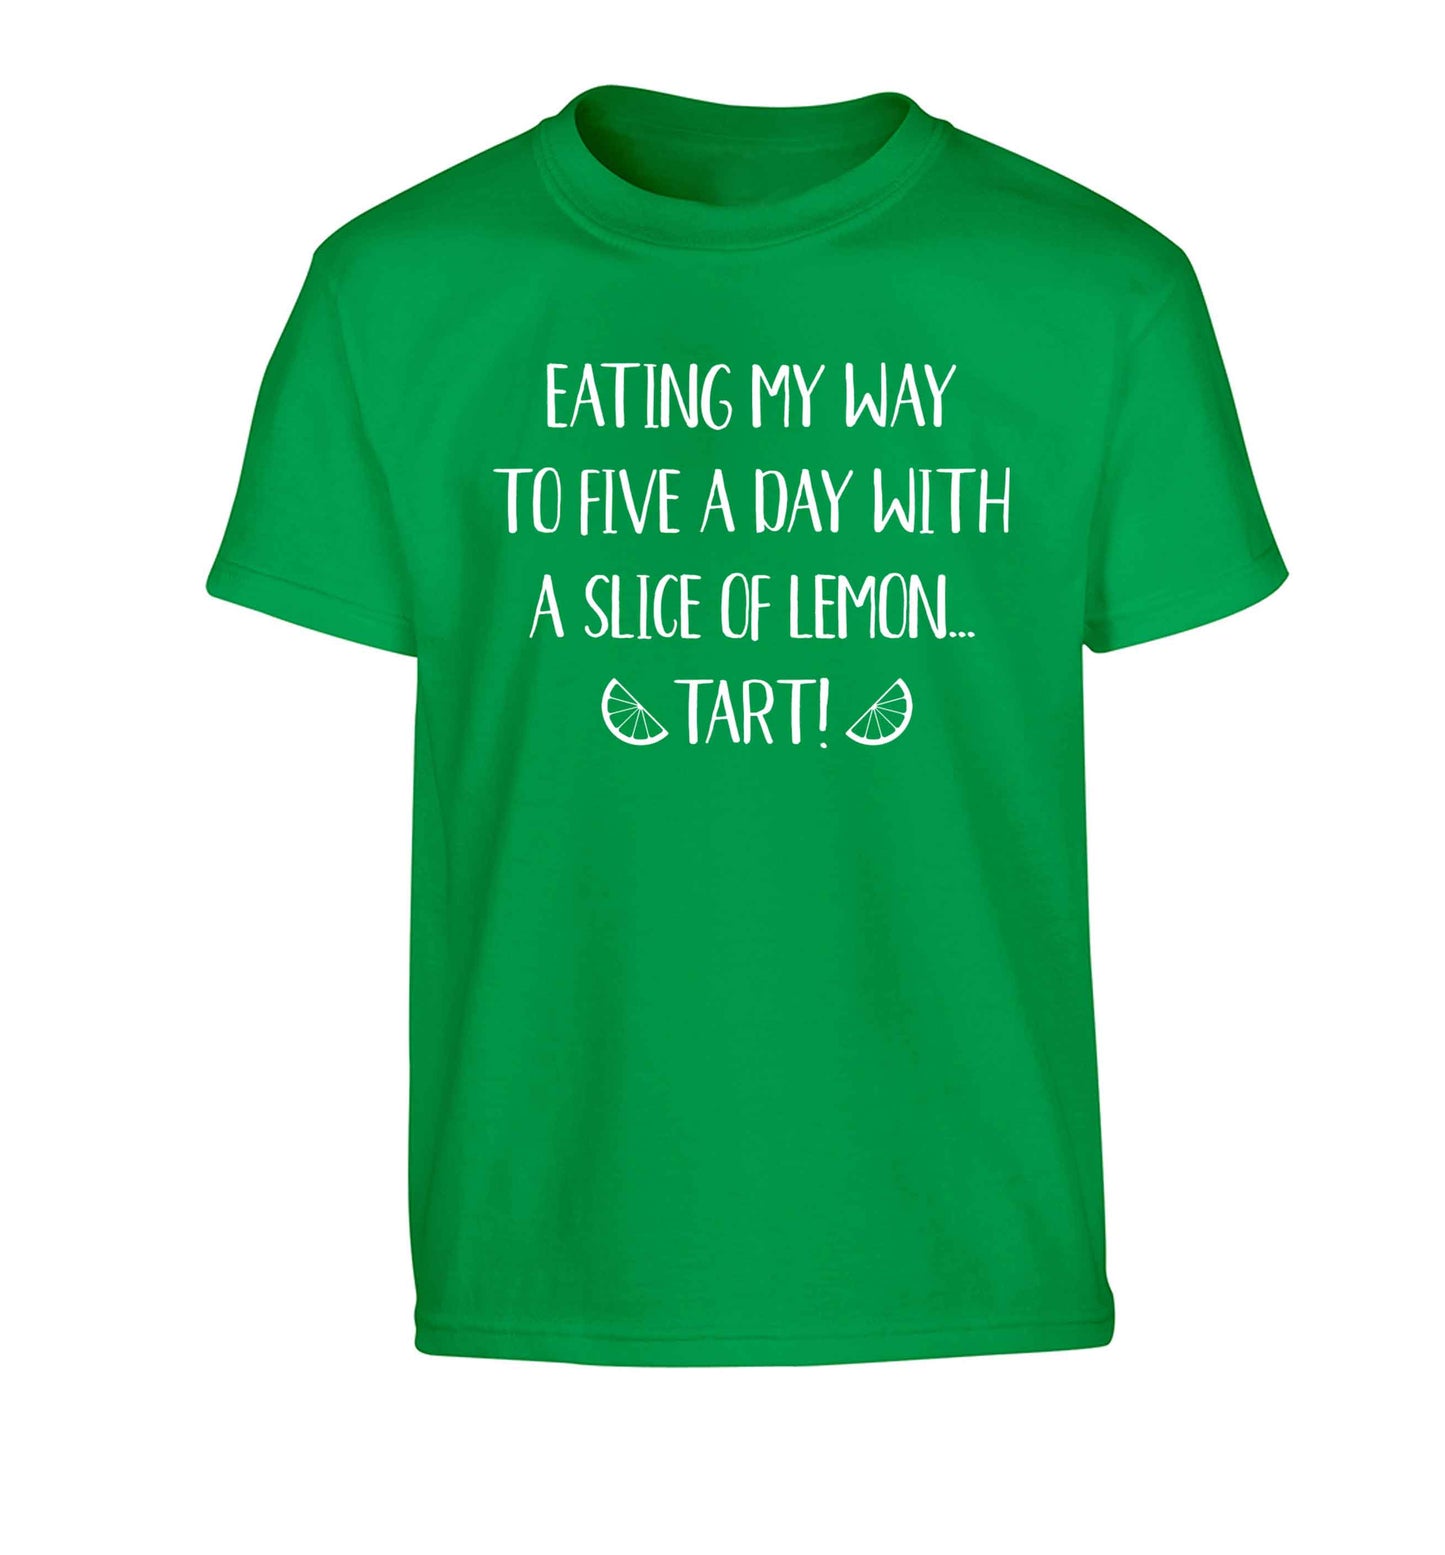 Eating my way to five a day with a slice of lemon tart Children's green Tshirt 12-13 Years